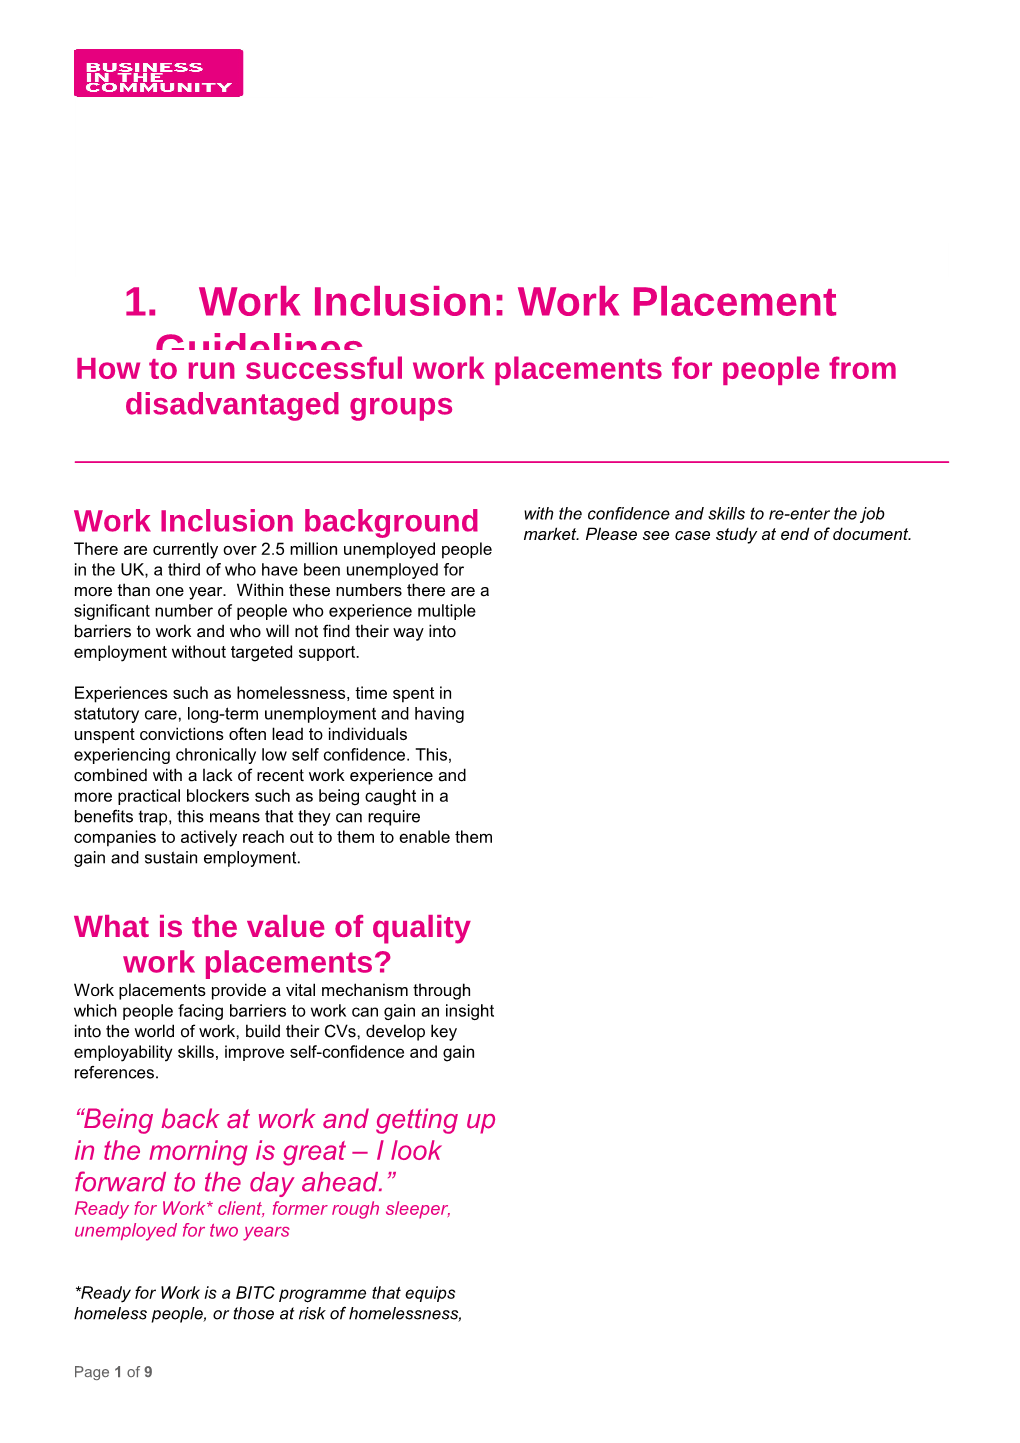 Work Inclusion: Work Placement Guidelines